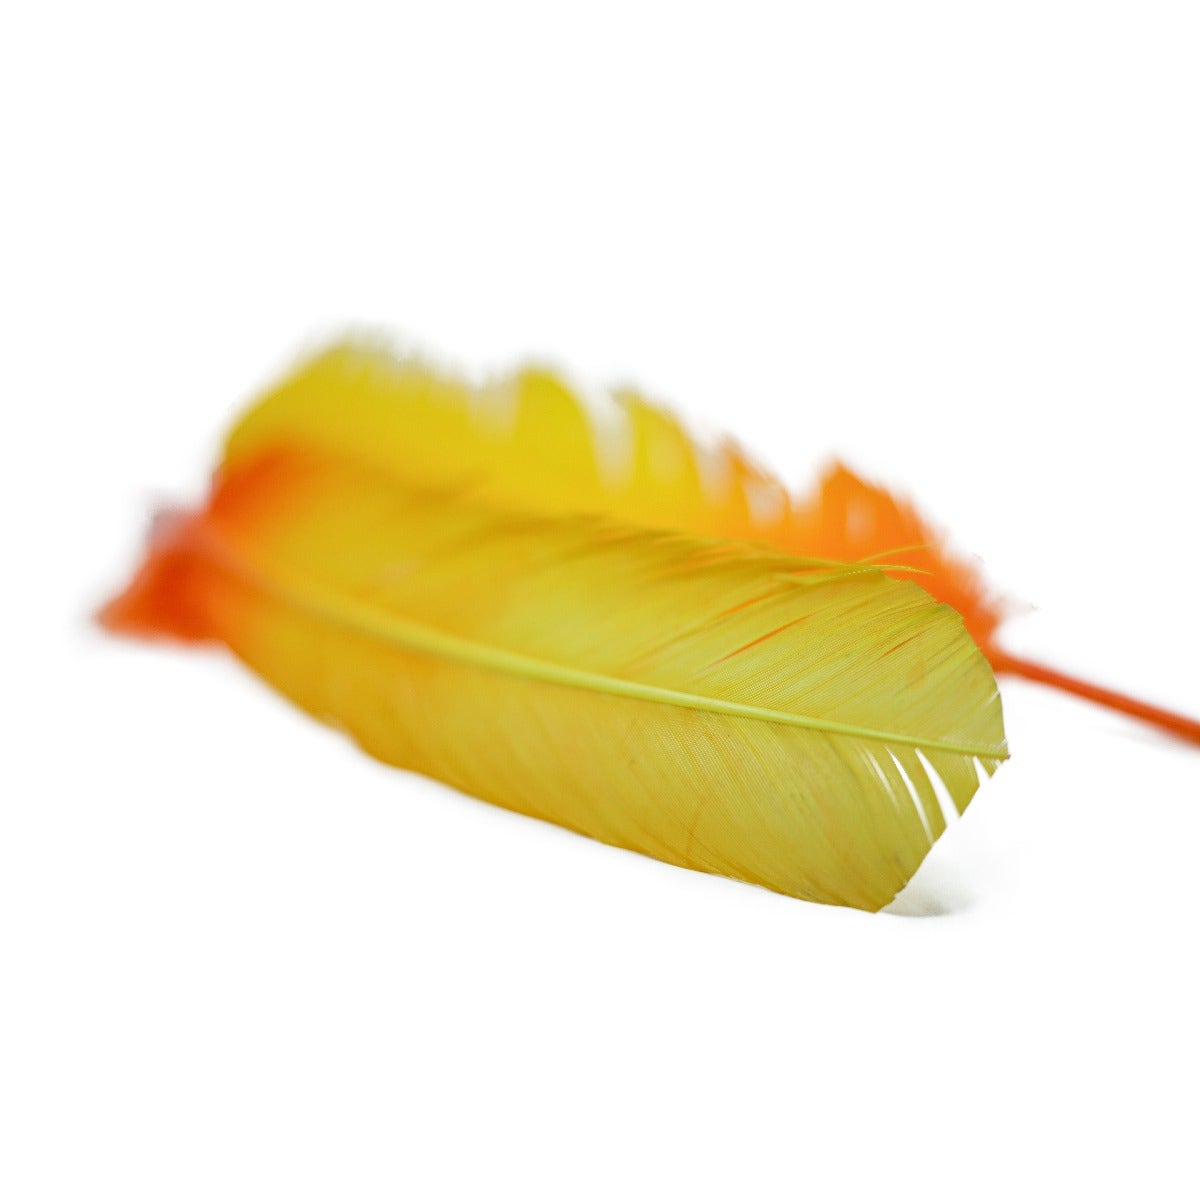 Ombré Turkey Quill Feathers 10-12” 2 pc- Gold - Orange